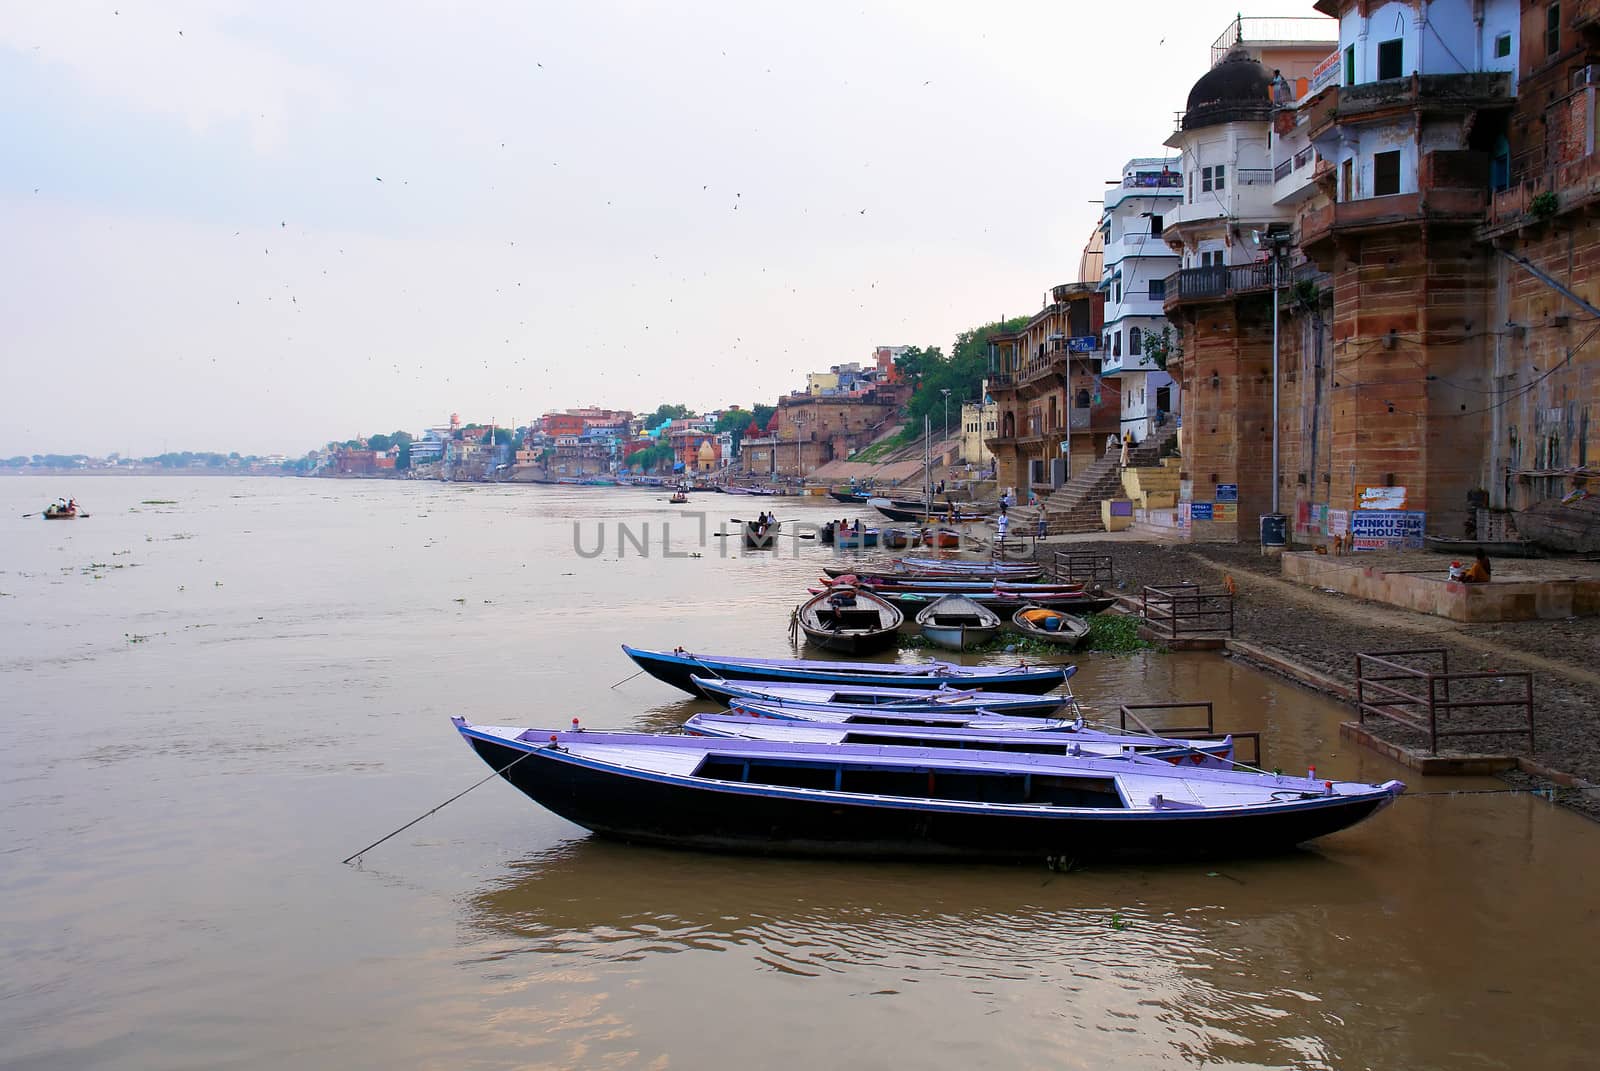 Boats on Ganges river in Varanasi, India by ptxgarfield